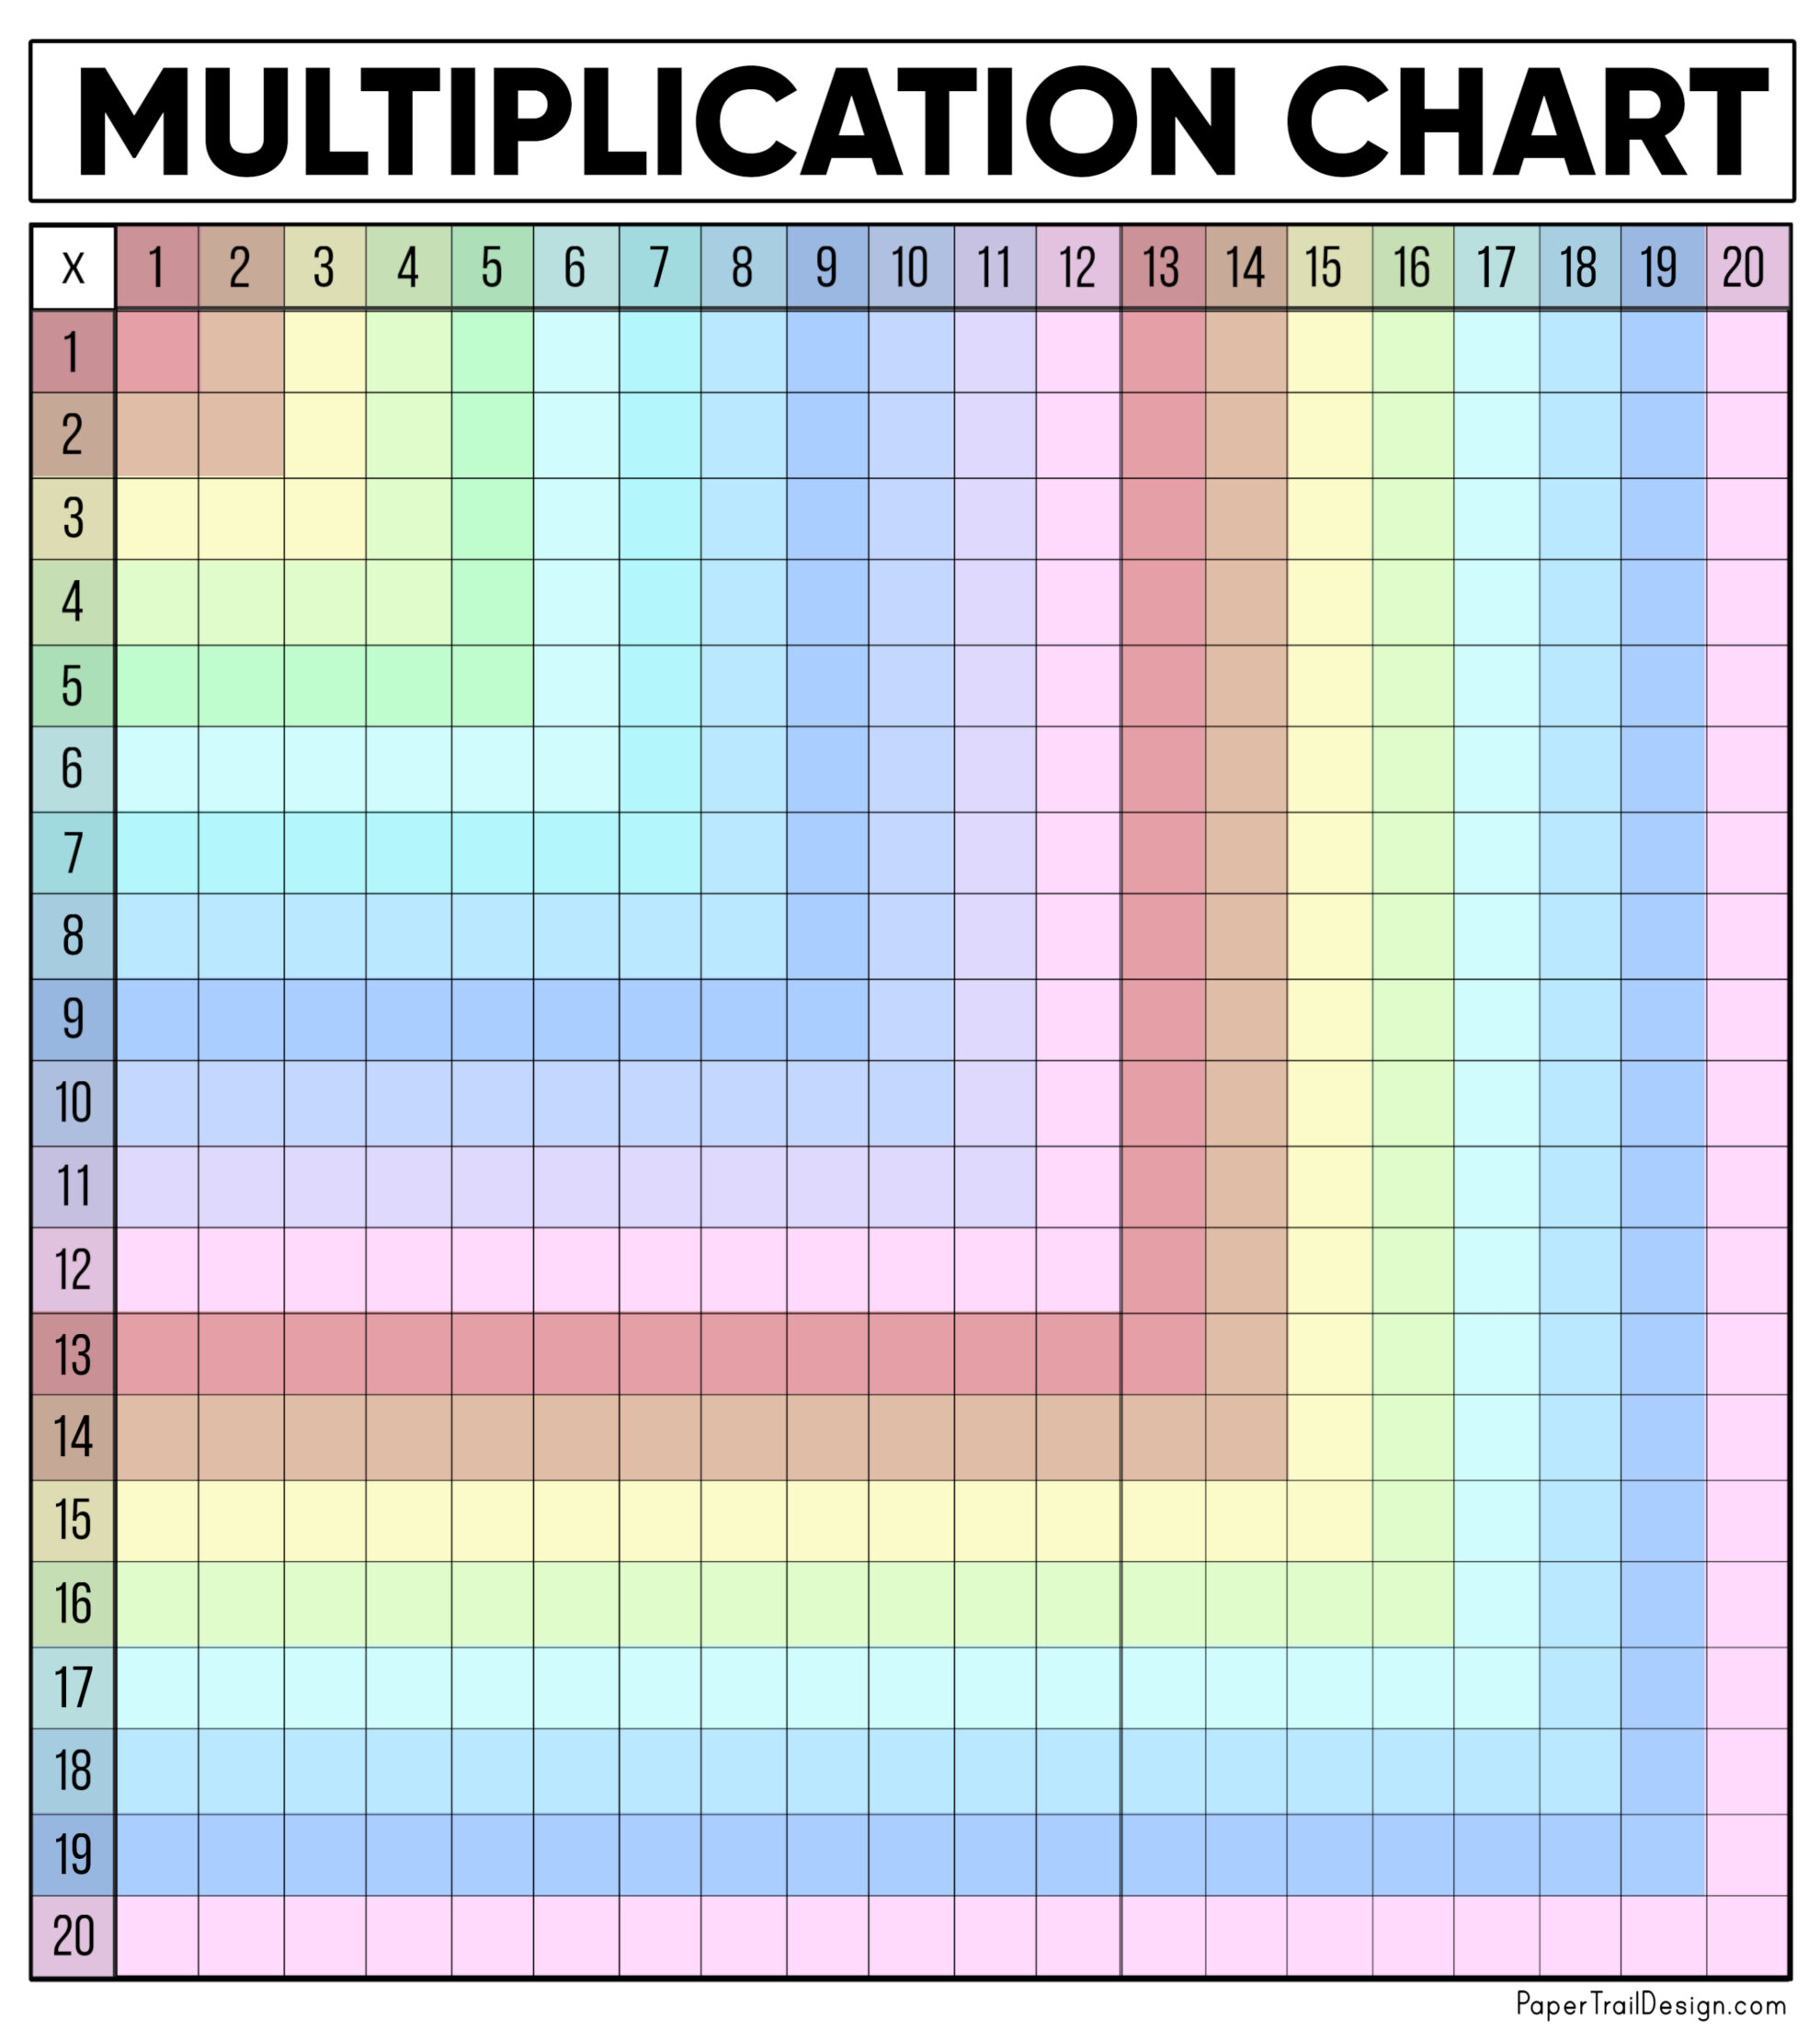 multiplication-table-printable-multiplication-table-itsybitsyfun-com